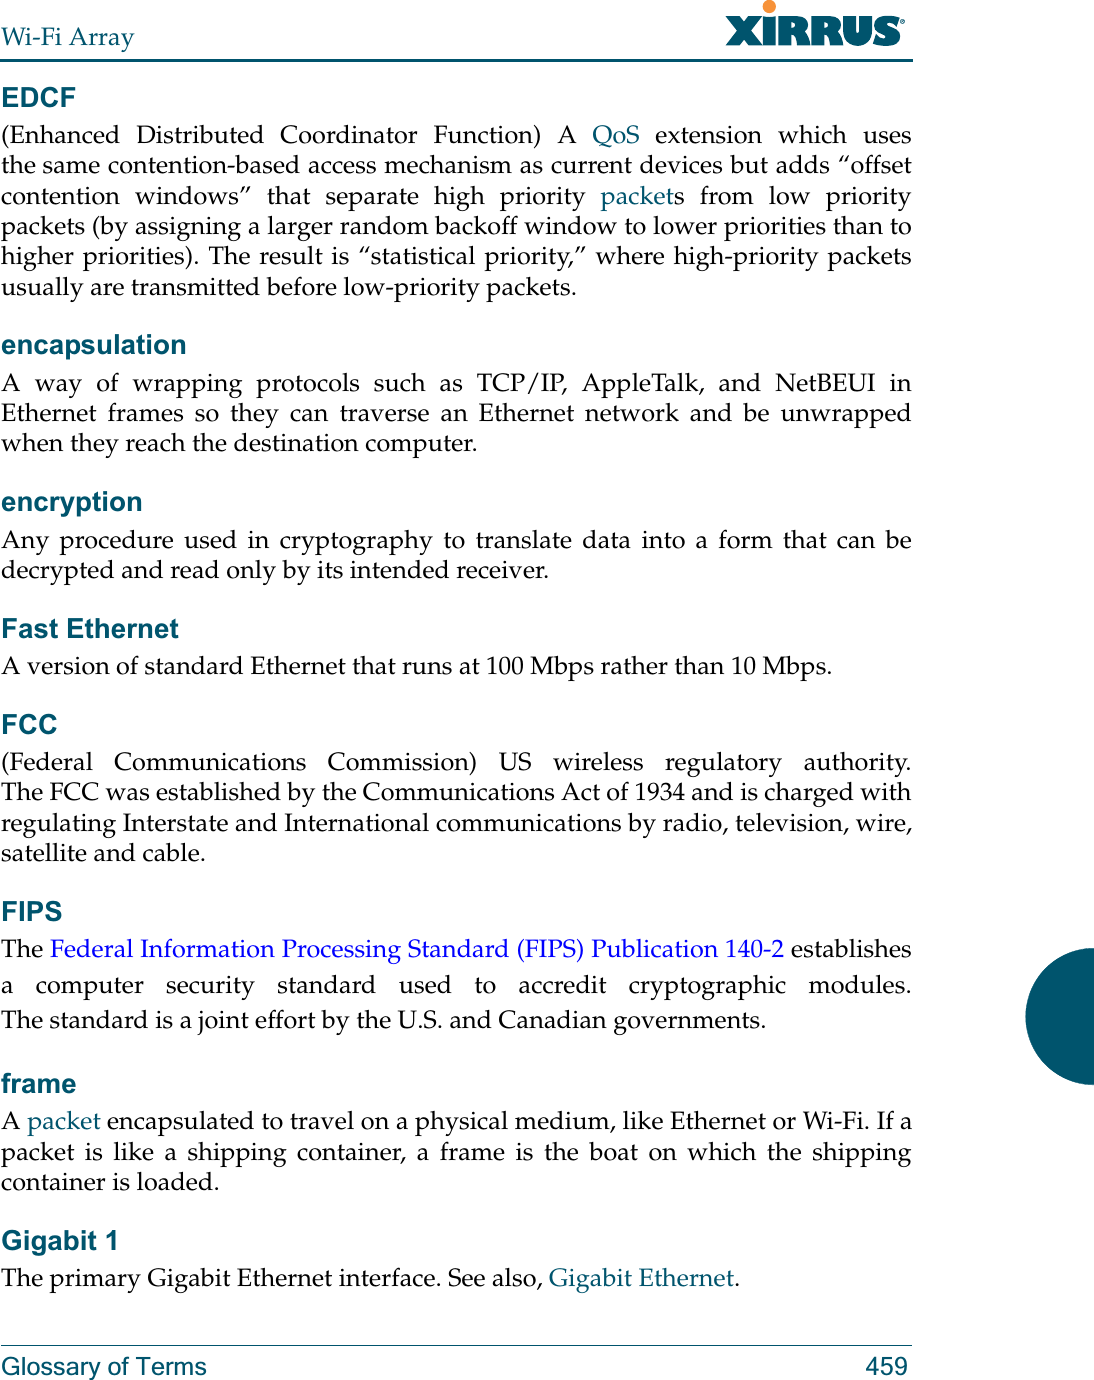 Wi-Fi ArrayGlossary of Terms 459EDCF(Enhanced Distributed Coordinator Function) A QoS extension which uses the same contention-based access mechanism as current devices but adds “offset contention windows” that separate high priority packets from low priority packets (by assigning a larger random backoff window to lower priorities than to higher priorities). The result is “statistical priority,” where high-priority packets usually are transmitted before low-priority packets.encapsulationA way of wrapping protocols such as TCP/IP, AppleTalk, and NetBEUI in Ethernet frames so they can traverse an Ethernet network and be unwrapped when they reach the destination computer.encryptionAny procedure used in cryptography to translate data into a form that can be decrypted and read only by its intended receiver.Fast EthernetA version of standard Ethernet that runs at 100 Mbps rather than 10 Mbps.FCC(Federal Communications Commission) US wireless regulatory authority. The FCC was established by the Communications Act of 1934 and is charged with regulating Interstate and International communications by radio, television, wire, satellite and cable.FIPSThe Federal Information Processing Standard (FIPS) Publication 140-2 establishes a computer security standard used to accredit cryptographic modules. The standard is a joint effort by the U.S. and Canadian governments. frameA packet encapsulated to travel on a physical medium, like Ethernet or Wi-Fi. If a packet is like a shipping container, a frame is the boat on which the shipping container is loaded. Gigabit 1The primary Gigabit Ethernet interface. See also, Gigabit Ethernet.